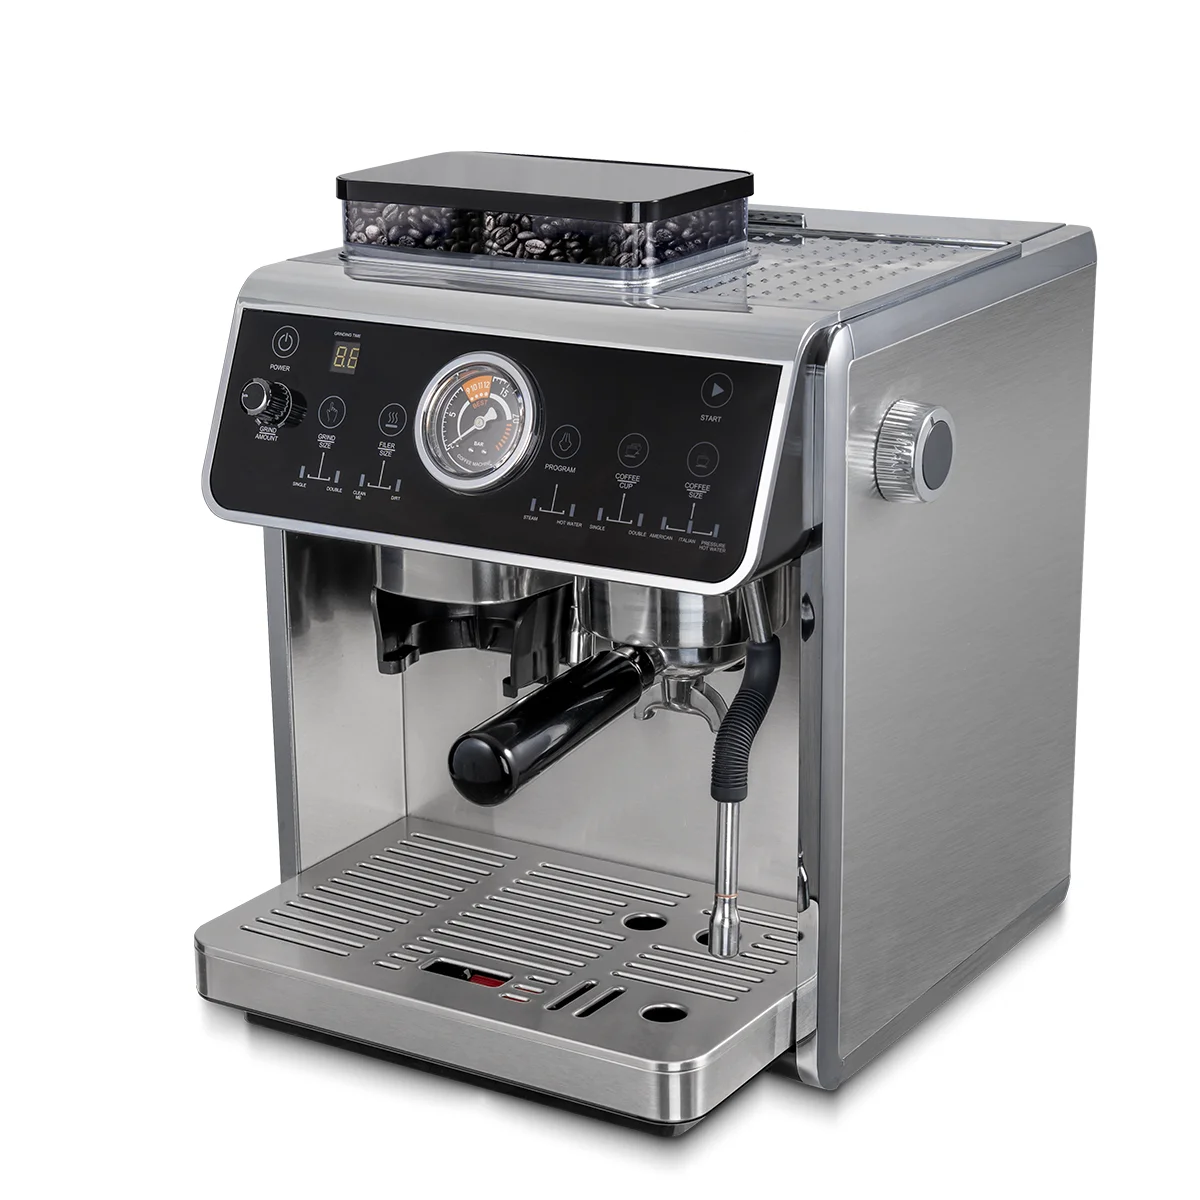 

Commercial Household Coffee Machine Multi-function Coffee Maker Semi-automatic Espresso Machines With Grinder